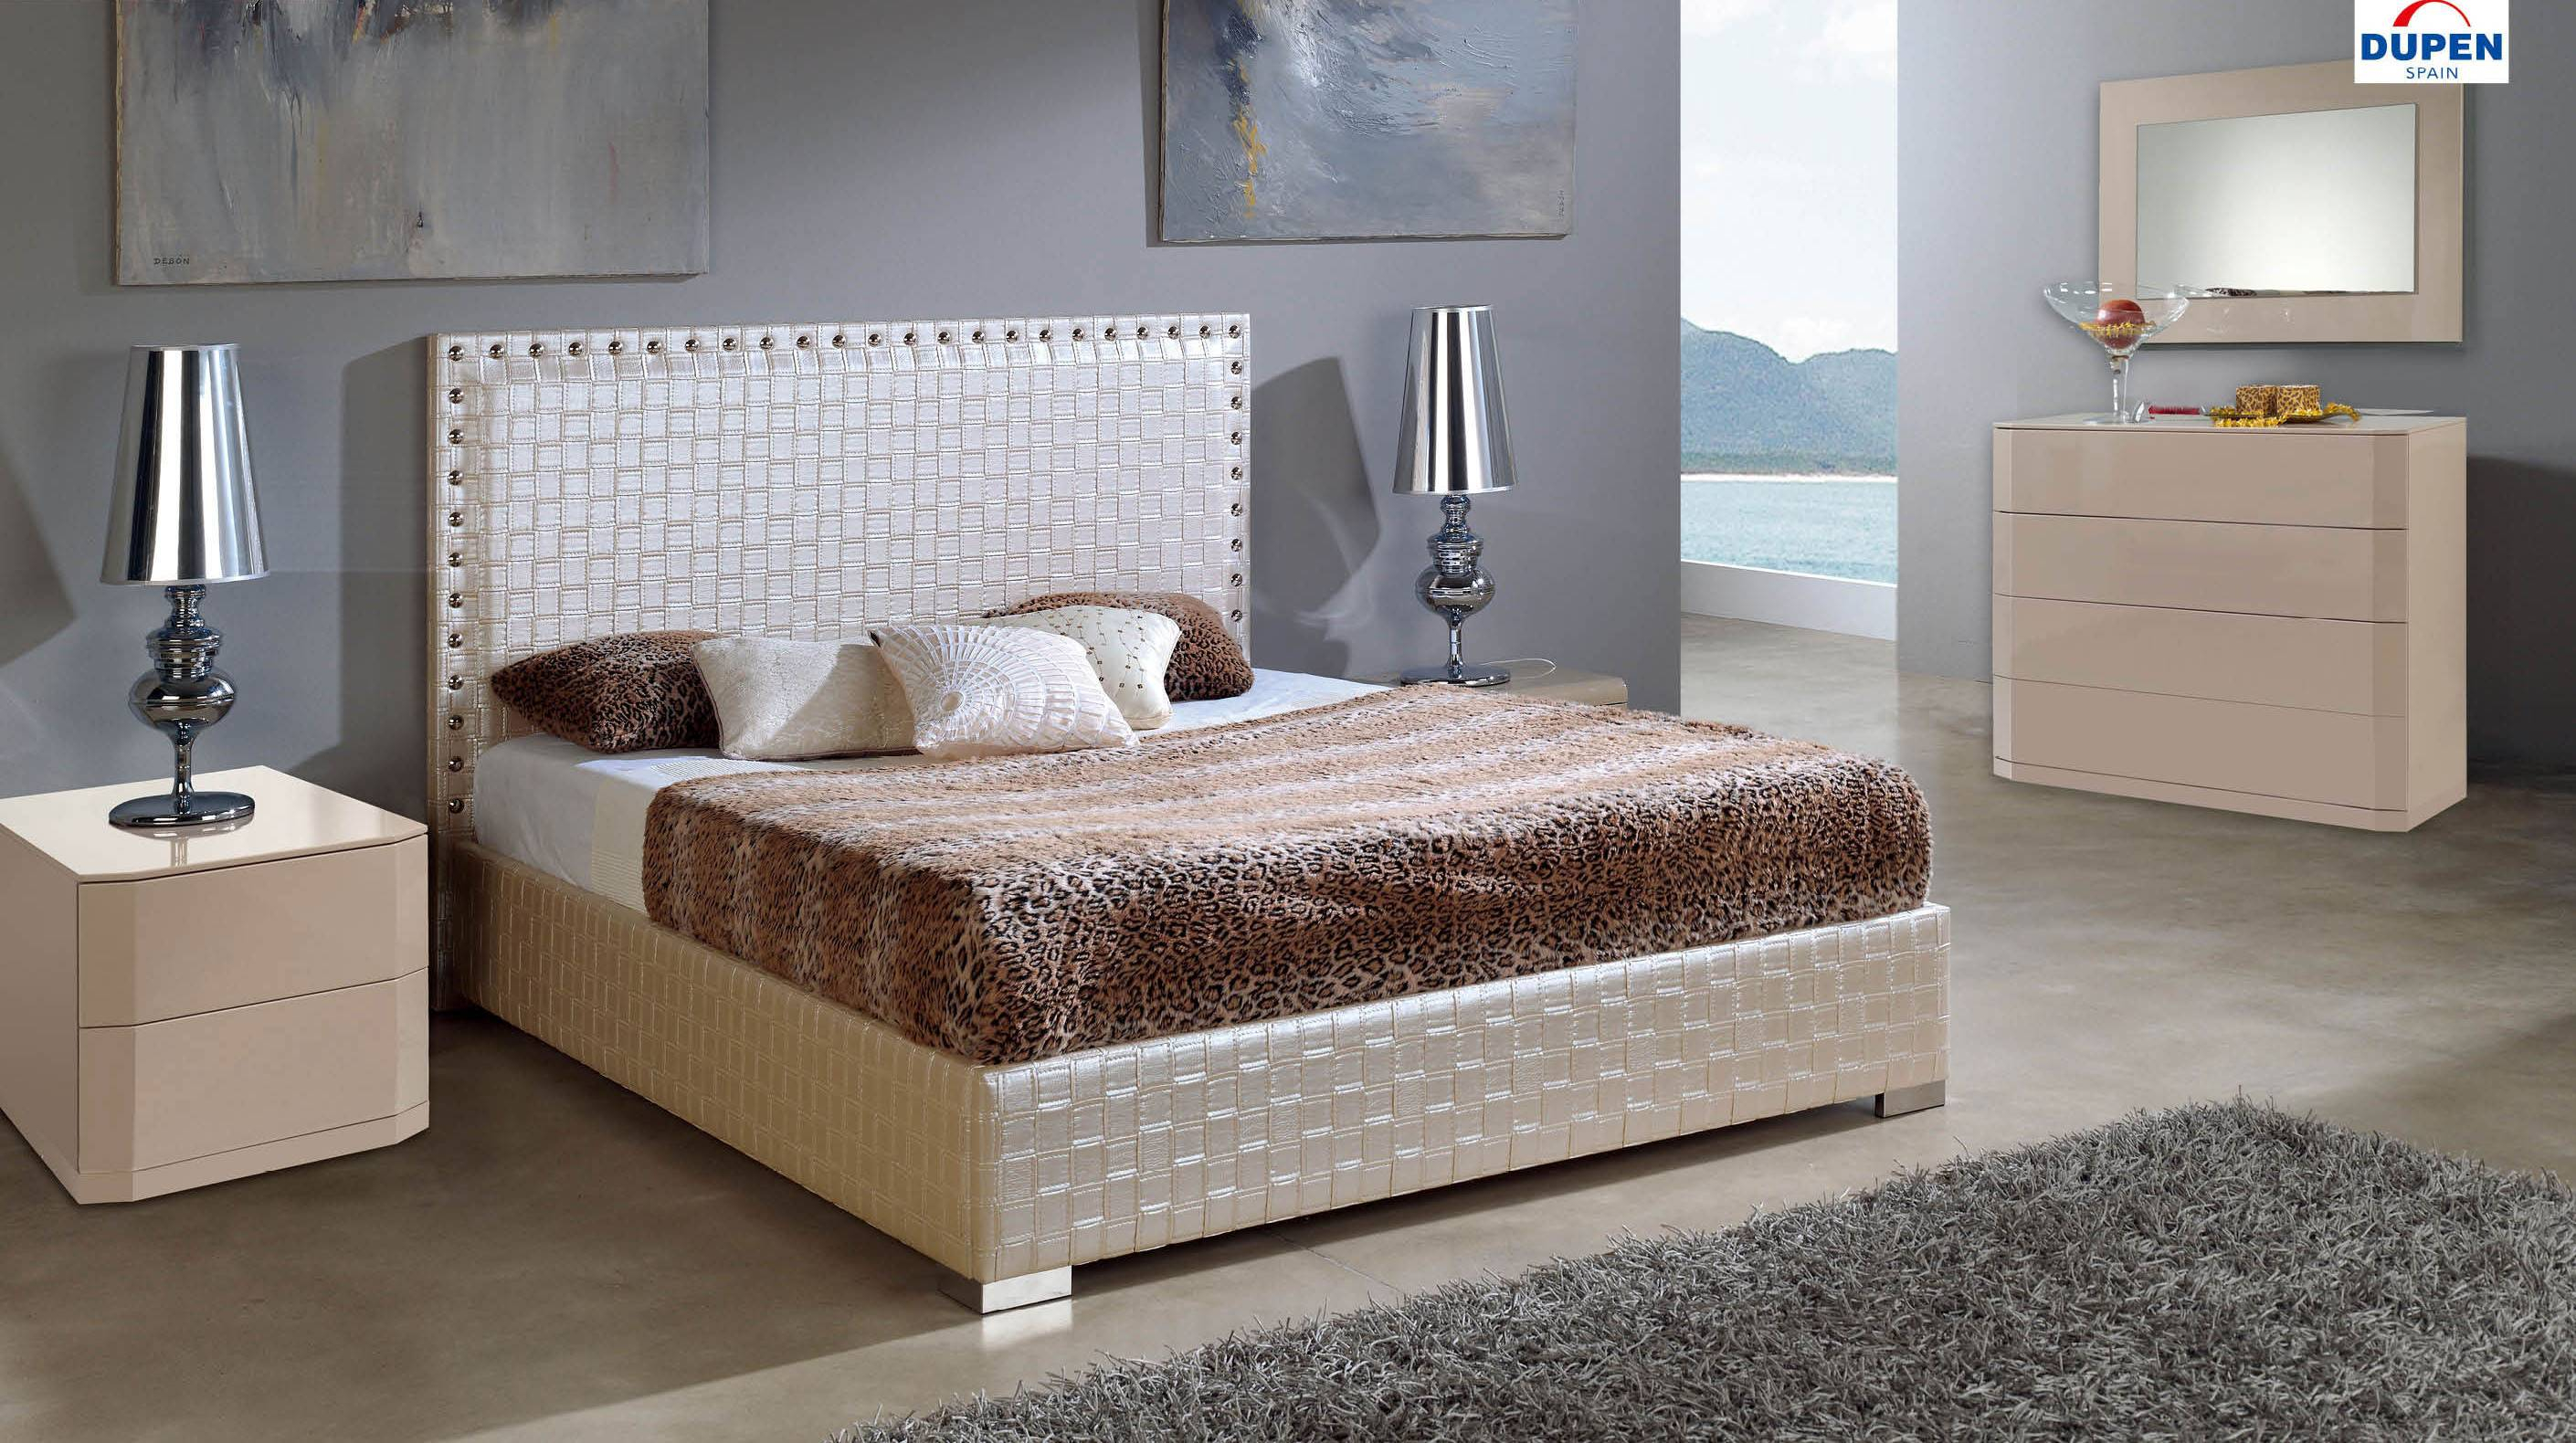 Made In Spain Leather Contemporary Platform Bedroom Sets With Extra Storage inside sizing 2820 X 1580